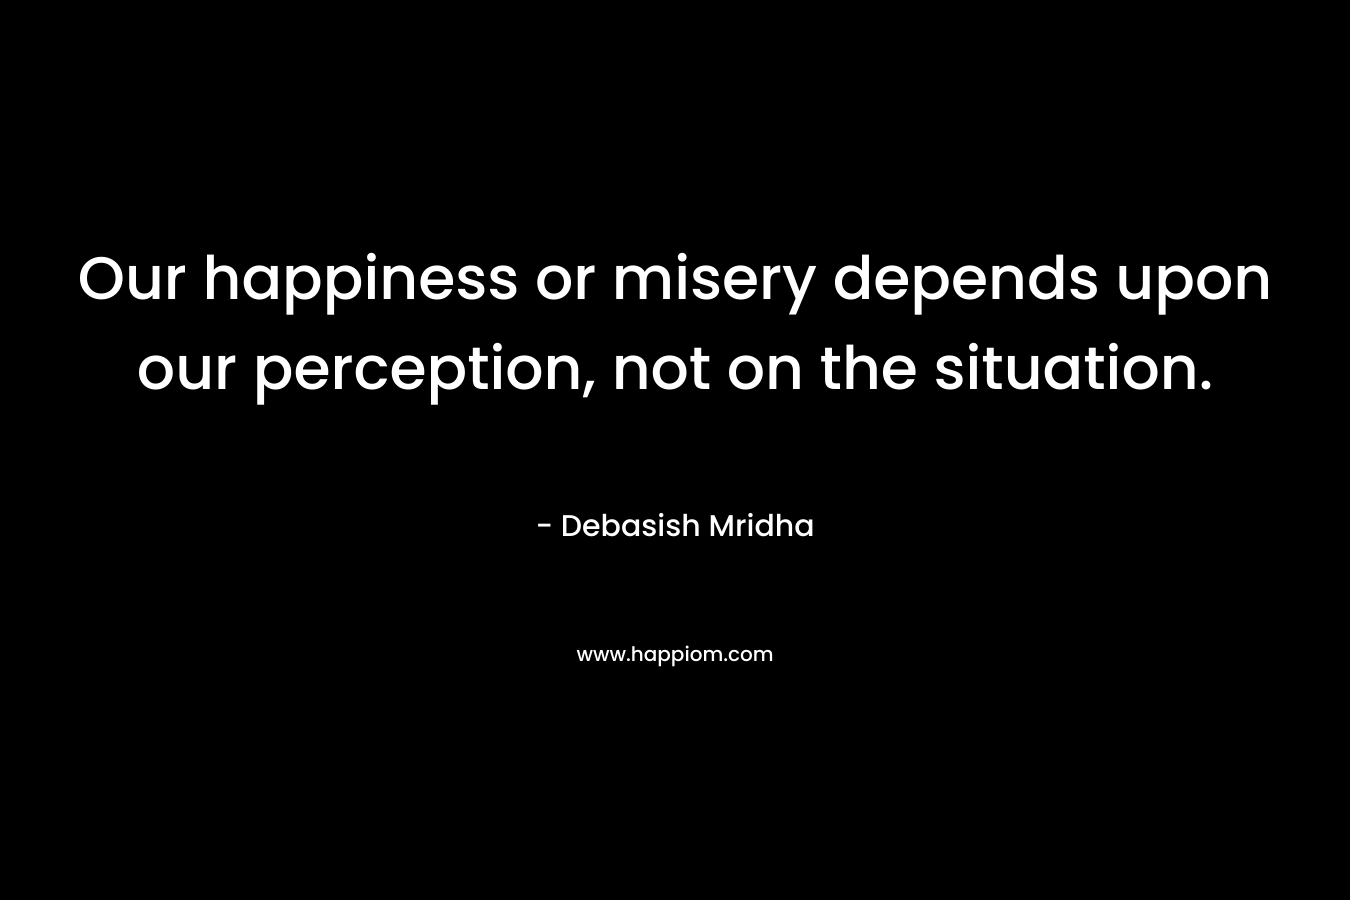 Our happiness or misery depends upon our perception, not on the situation.